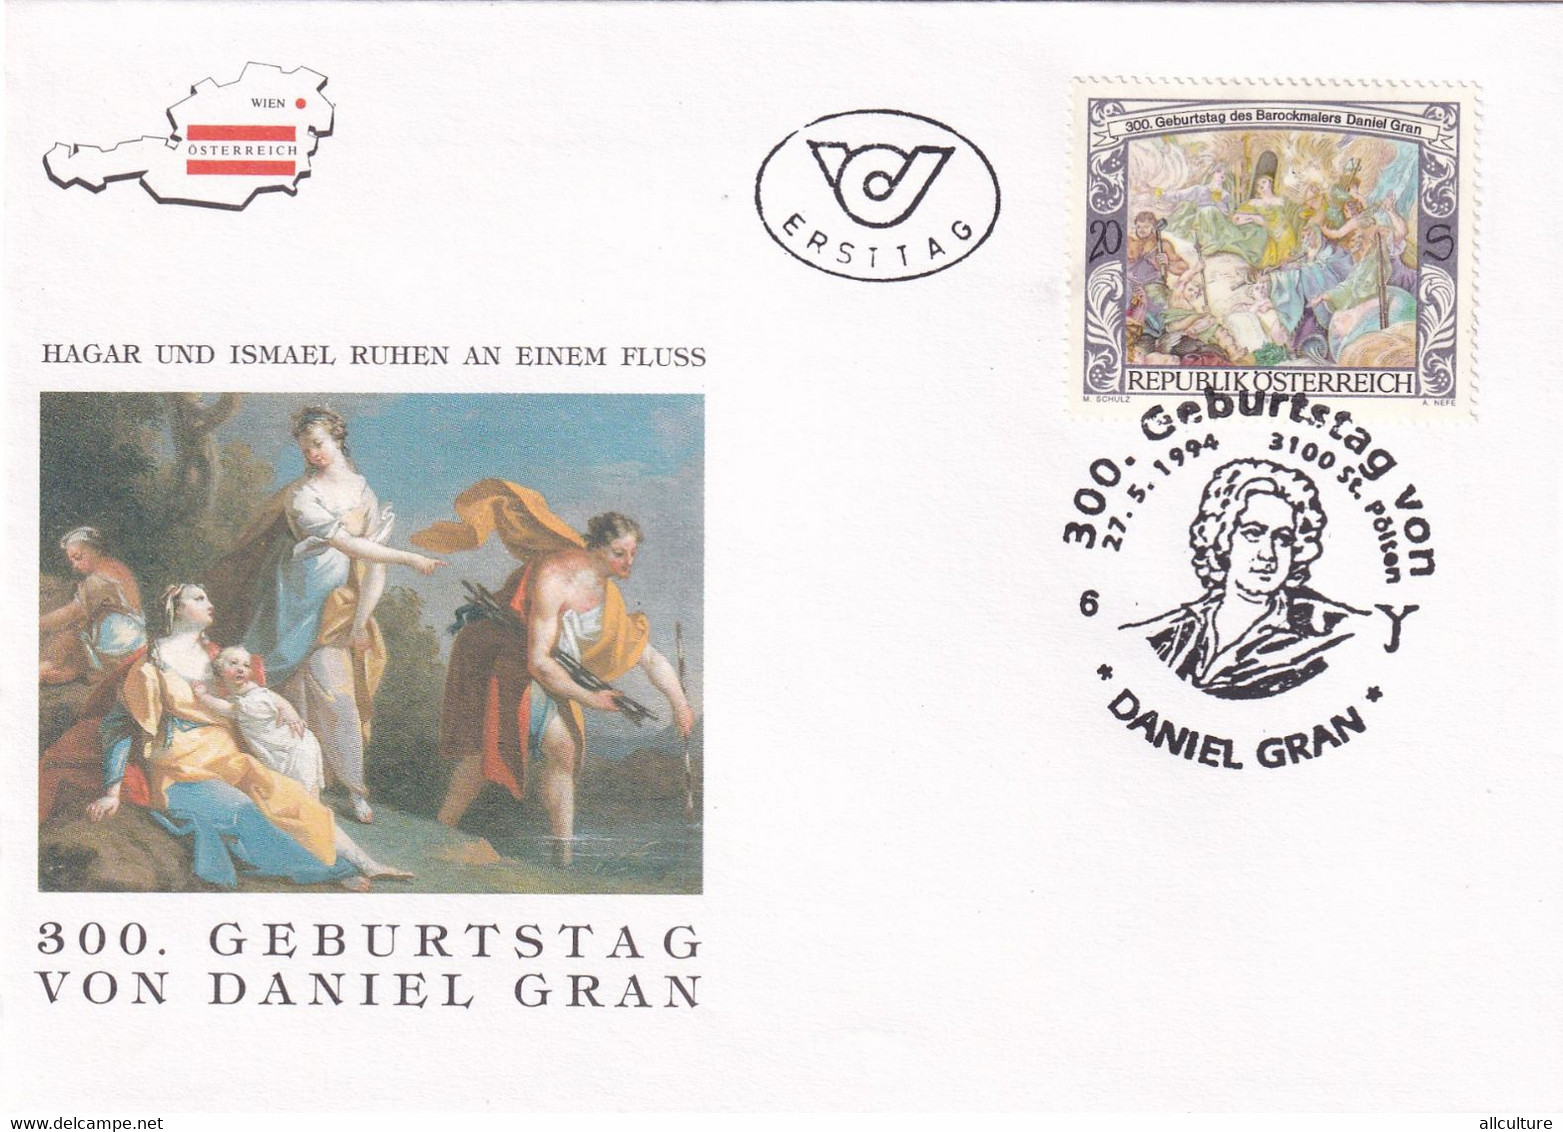 A8393- ERSTTAG DANIEL GRAN PAINTINGS, WEIN 1994 REPUBLIC OSTERREICH AUSTRIA USED STAMP ON COVER - Storia Postale